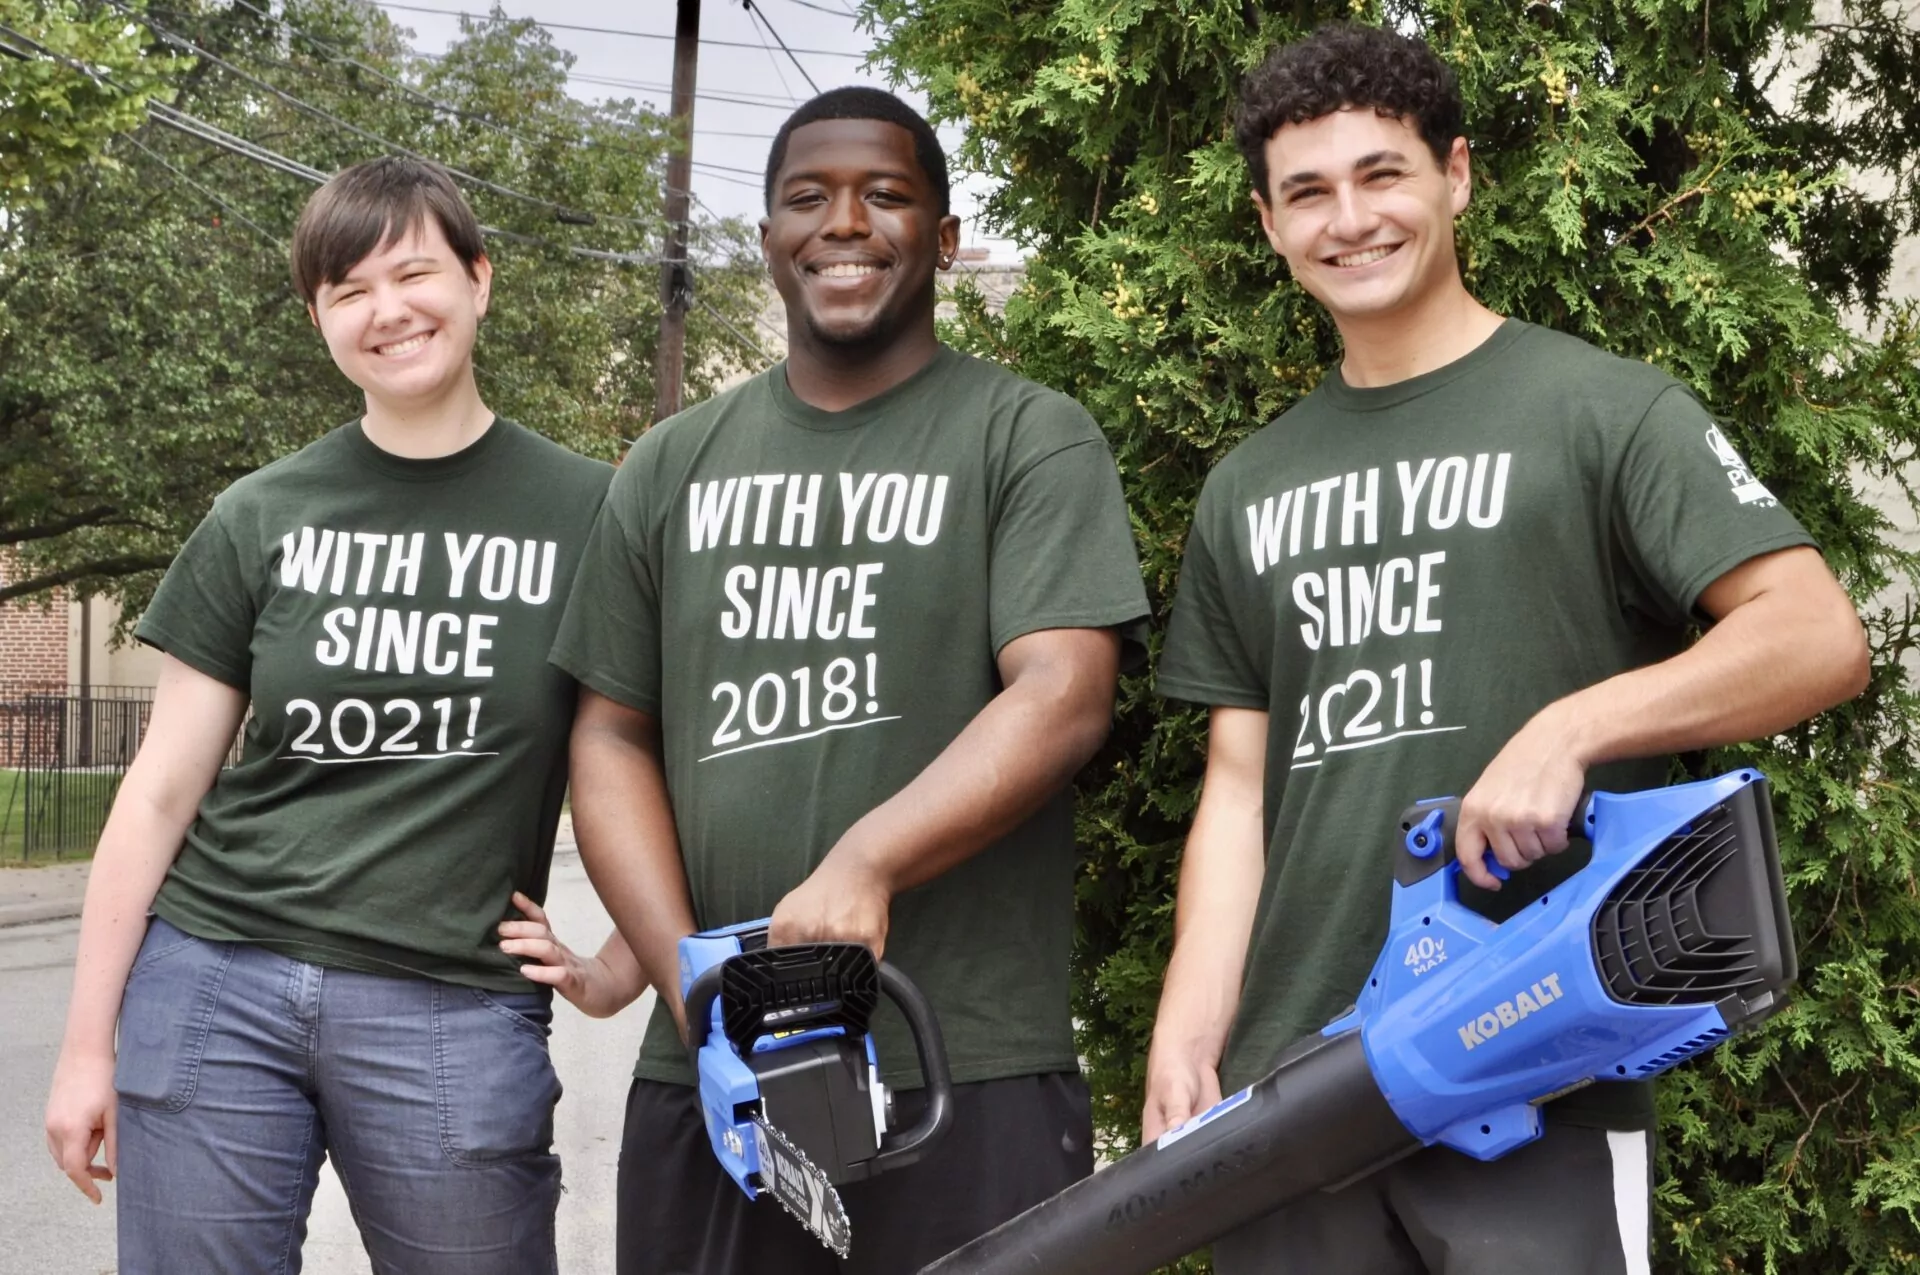 Three volunteers smiling and holding tools